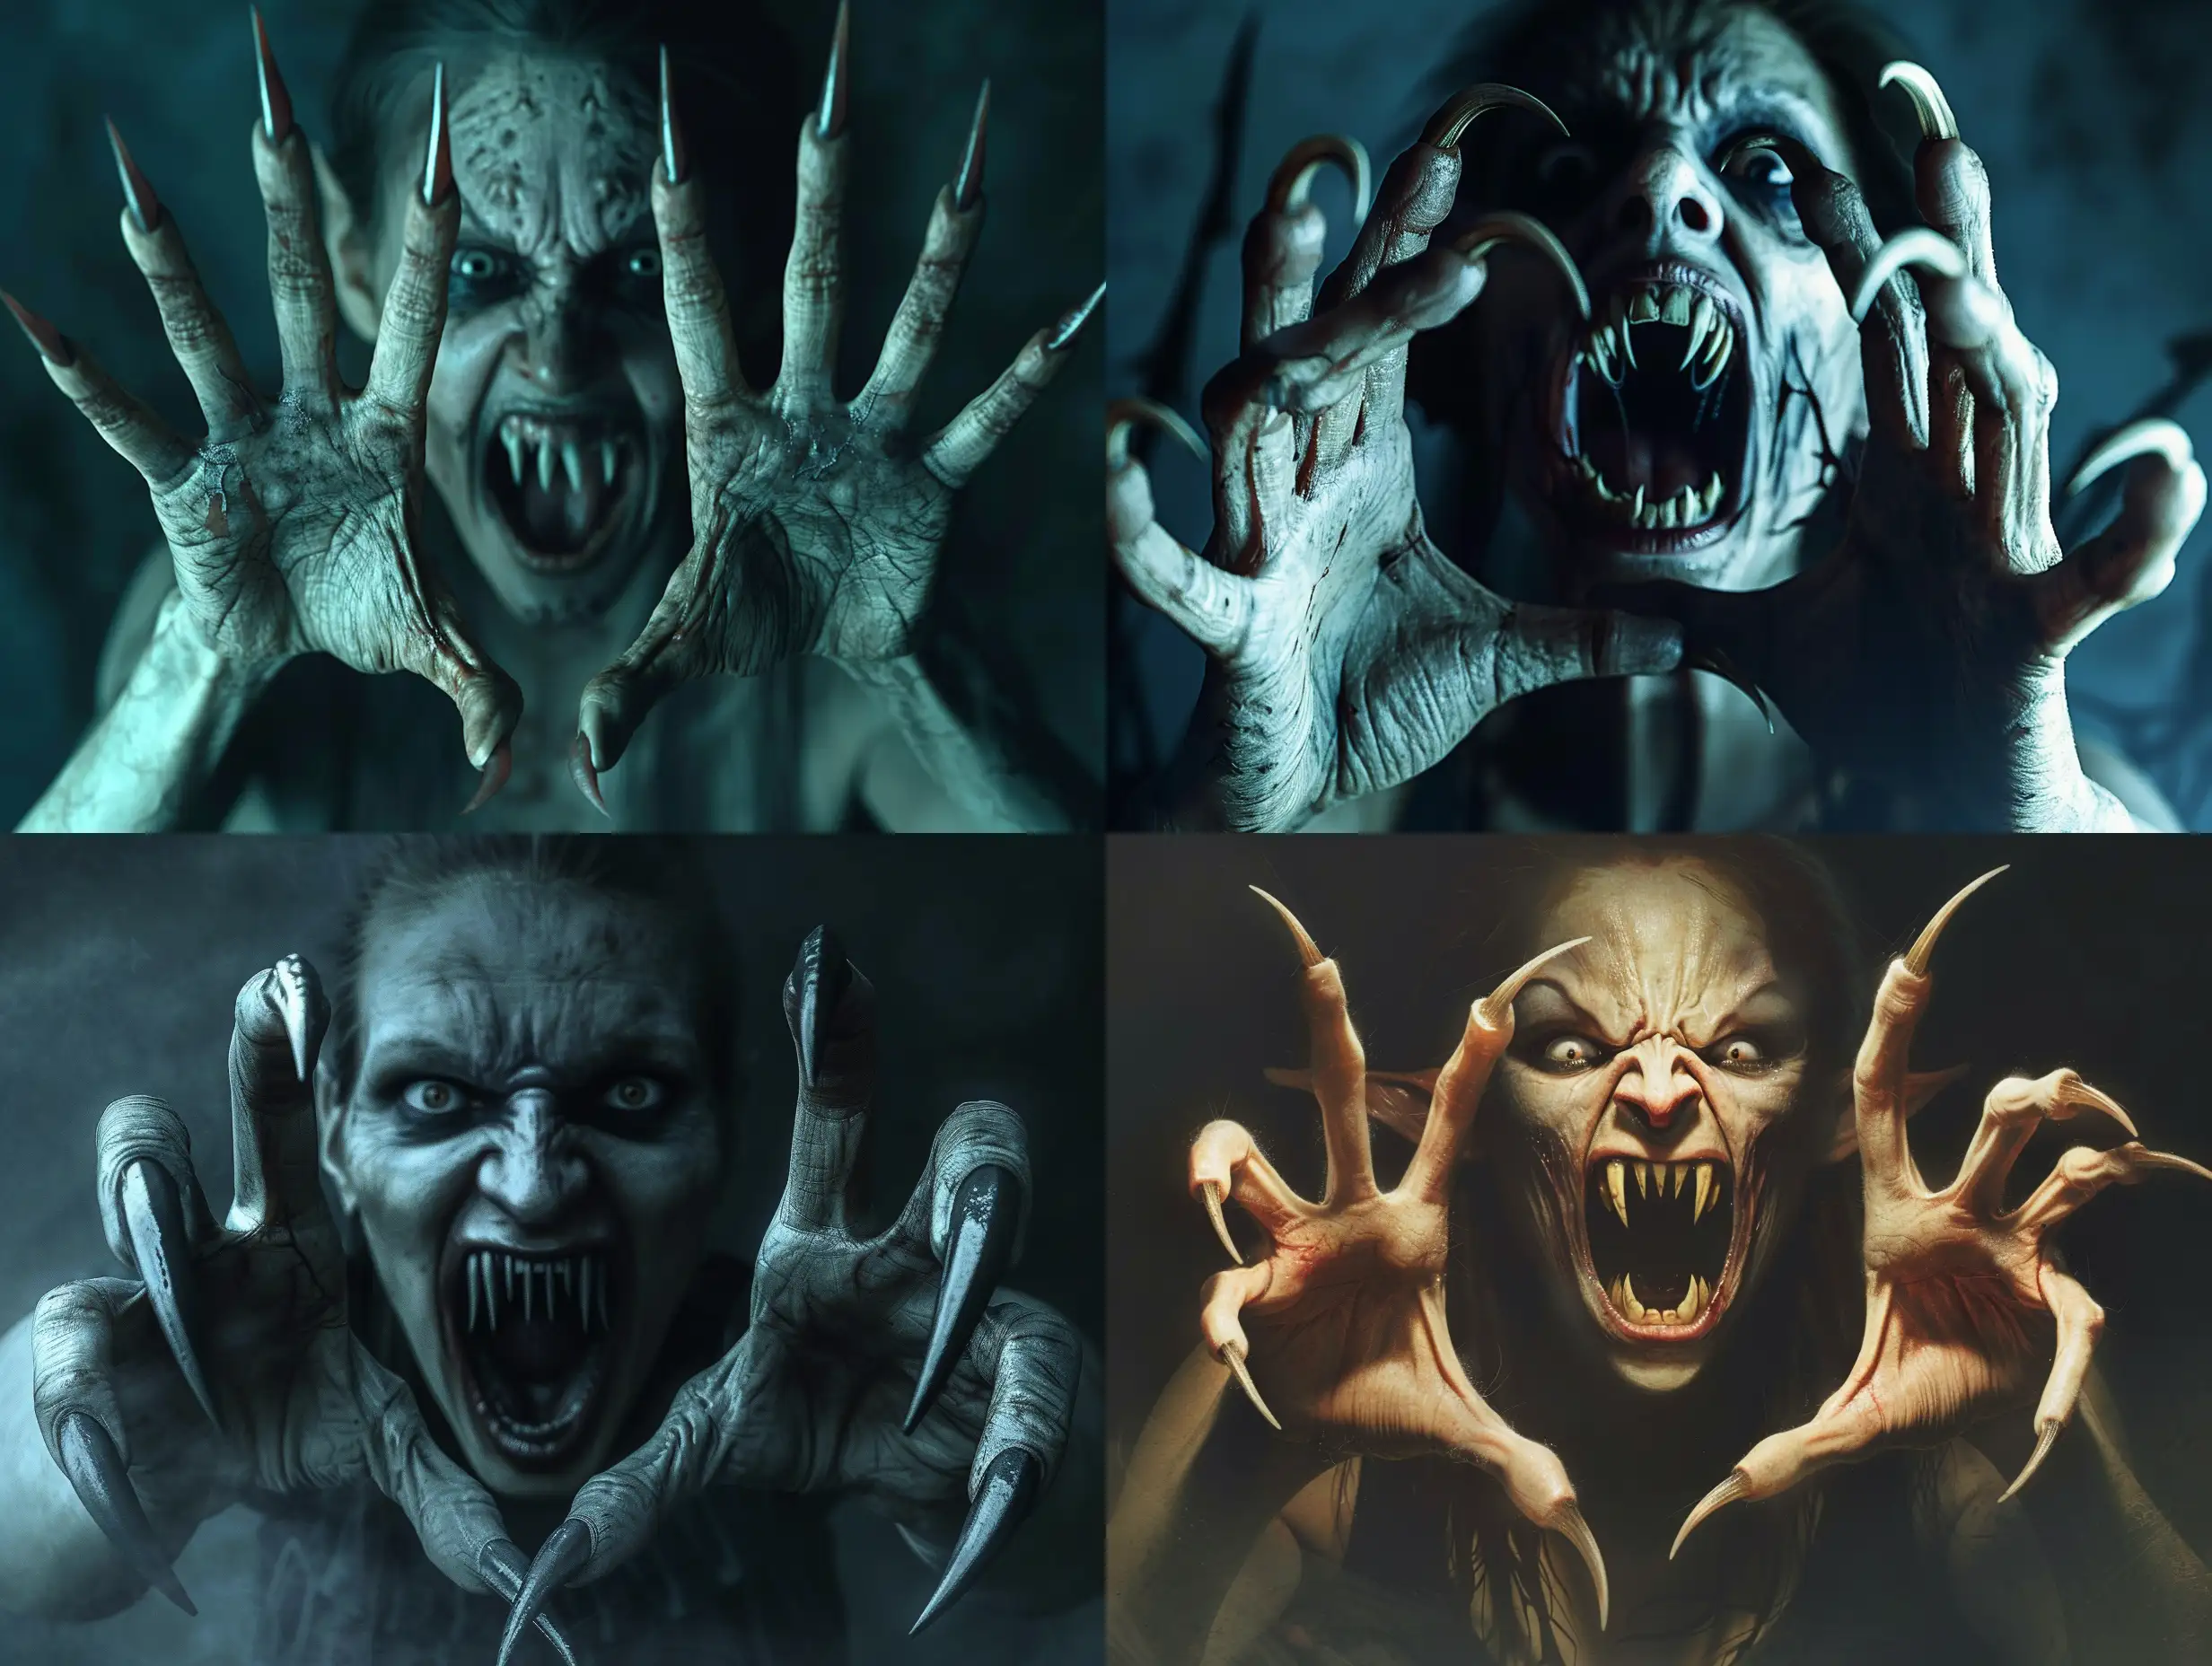 a photorealistic and horrifying nightmare scene of a scary vampire (female) with long pointed nails like claws protruding from each of the  detailed and realistic human five fingers. The vampire's menacingly open mouth reveals pointed teeth like fangs,  her eyes are a vacant, under atmospheric lighting in a full anatomical depiction, set in a night-time setting that is very clear without flaws, horror, photorealism, detailed, textured, dark, haunting, night-time scene, intense, creepy, undead, spooky, eerie, atmospheric lighting, nightmare, grotesque, terrifying, human hands, very clear without flaws with five fingers, realistic anatomy. high-angle shot, portrait.